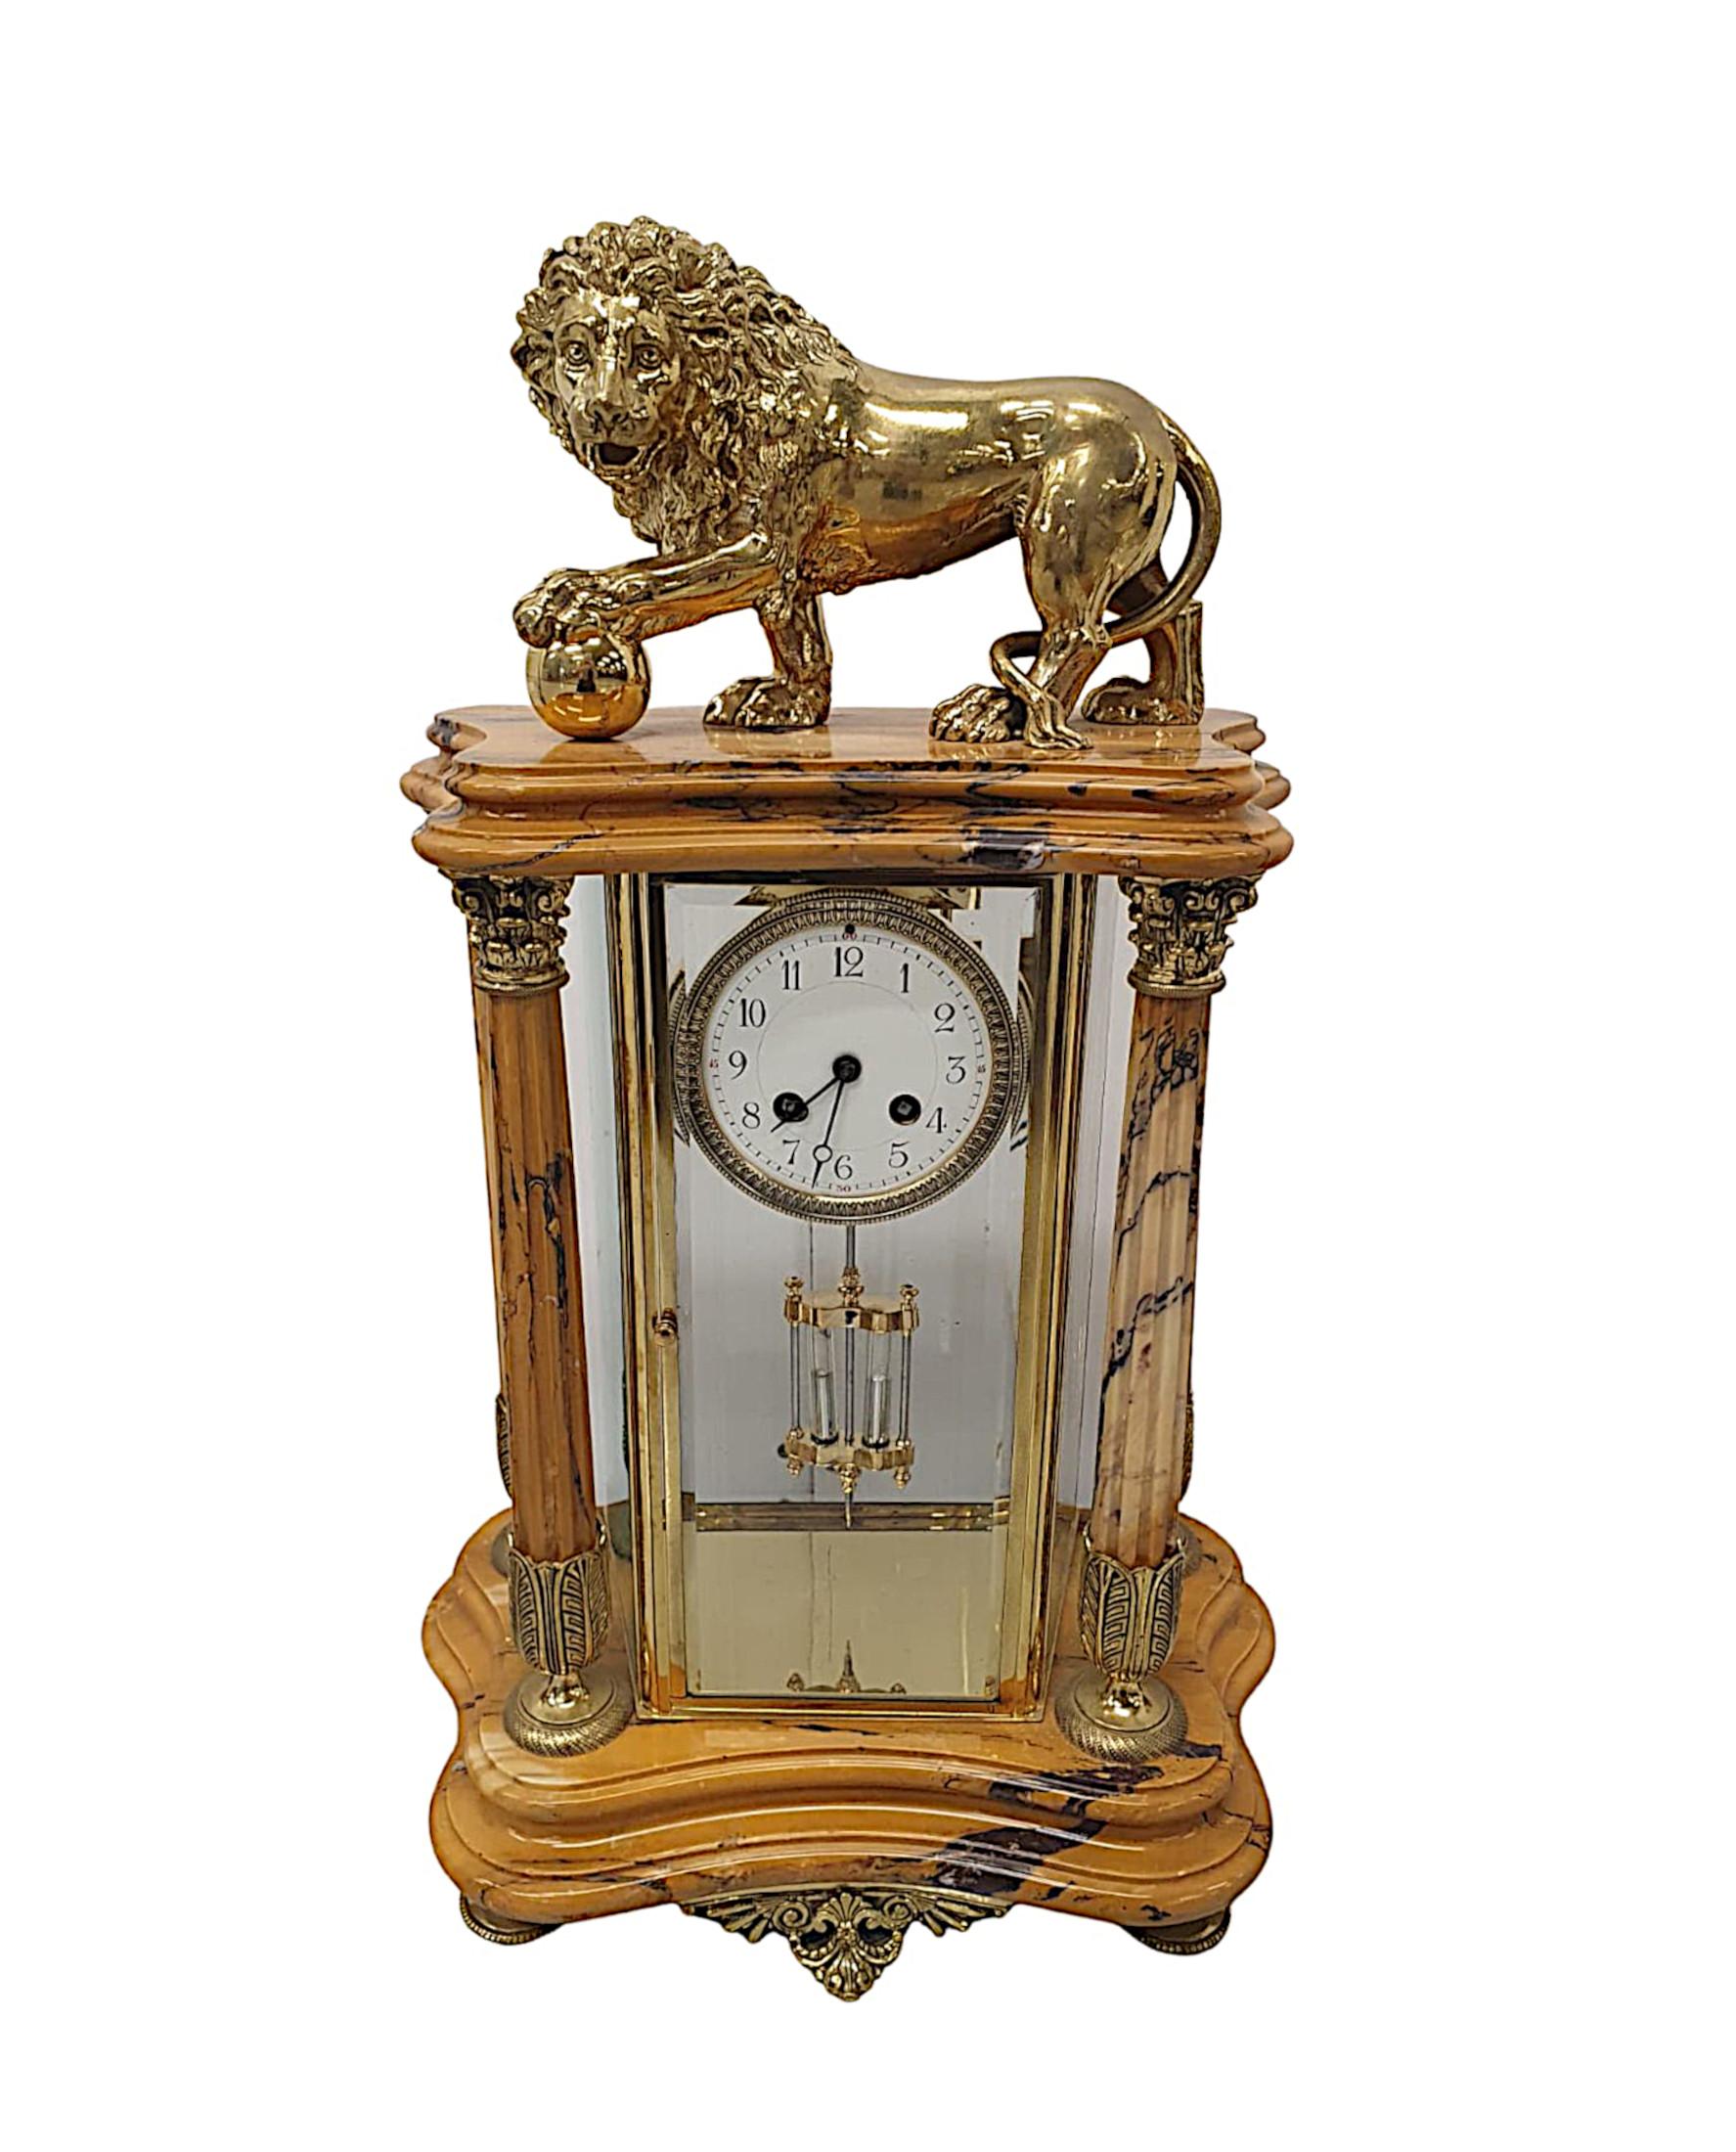 A very fine 19th century Sienna marble three piece clock garniture set in the Neoclassical manner, of fabulous quality, fully serviced and brass mounted throughout. The garniture clock with white enamel dial of circular form with black numerals is